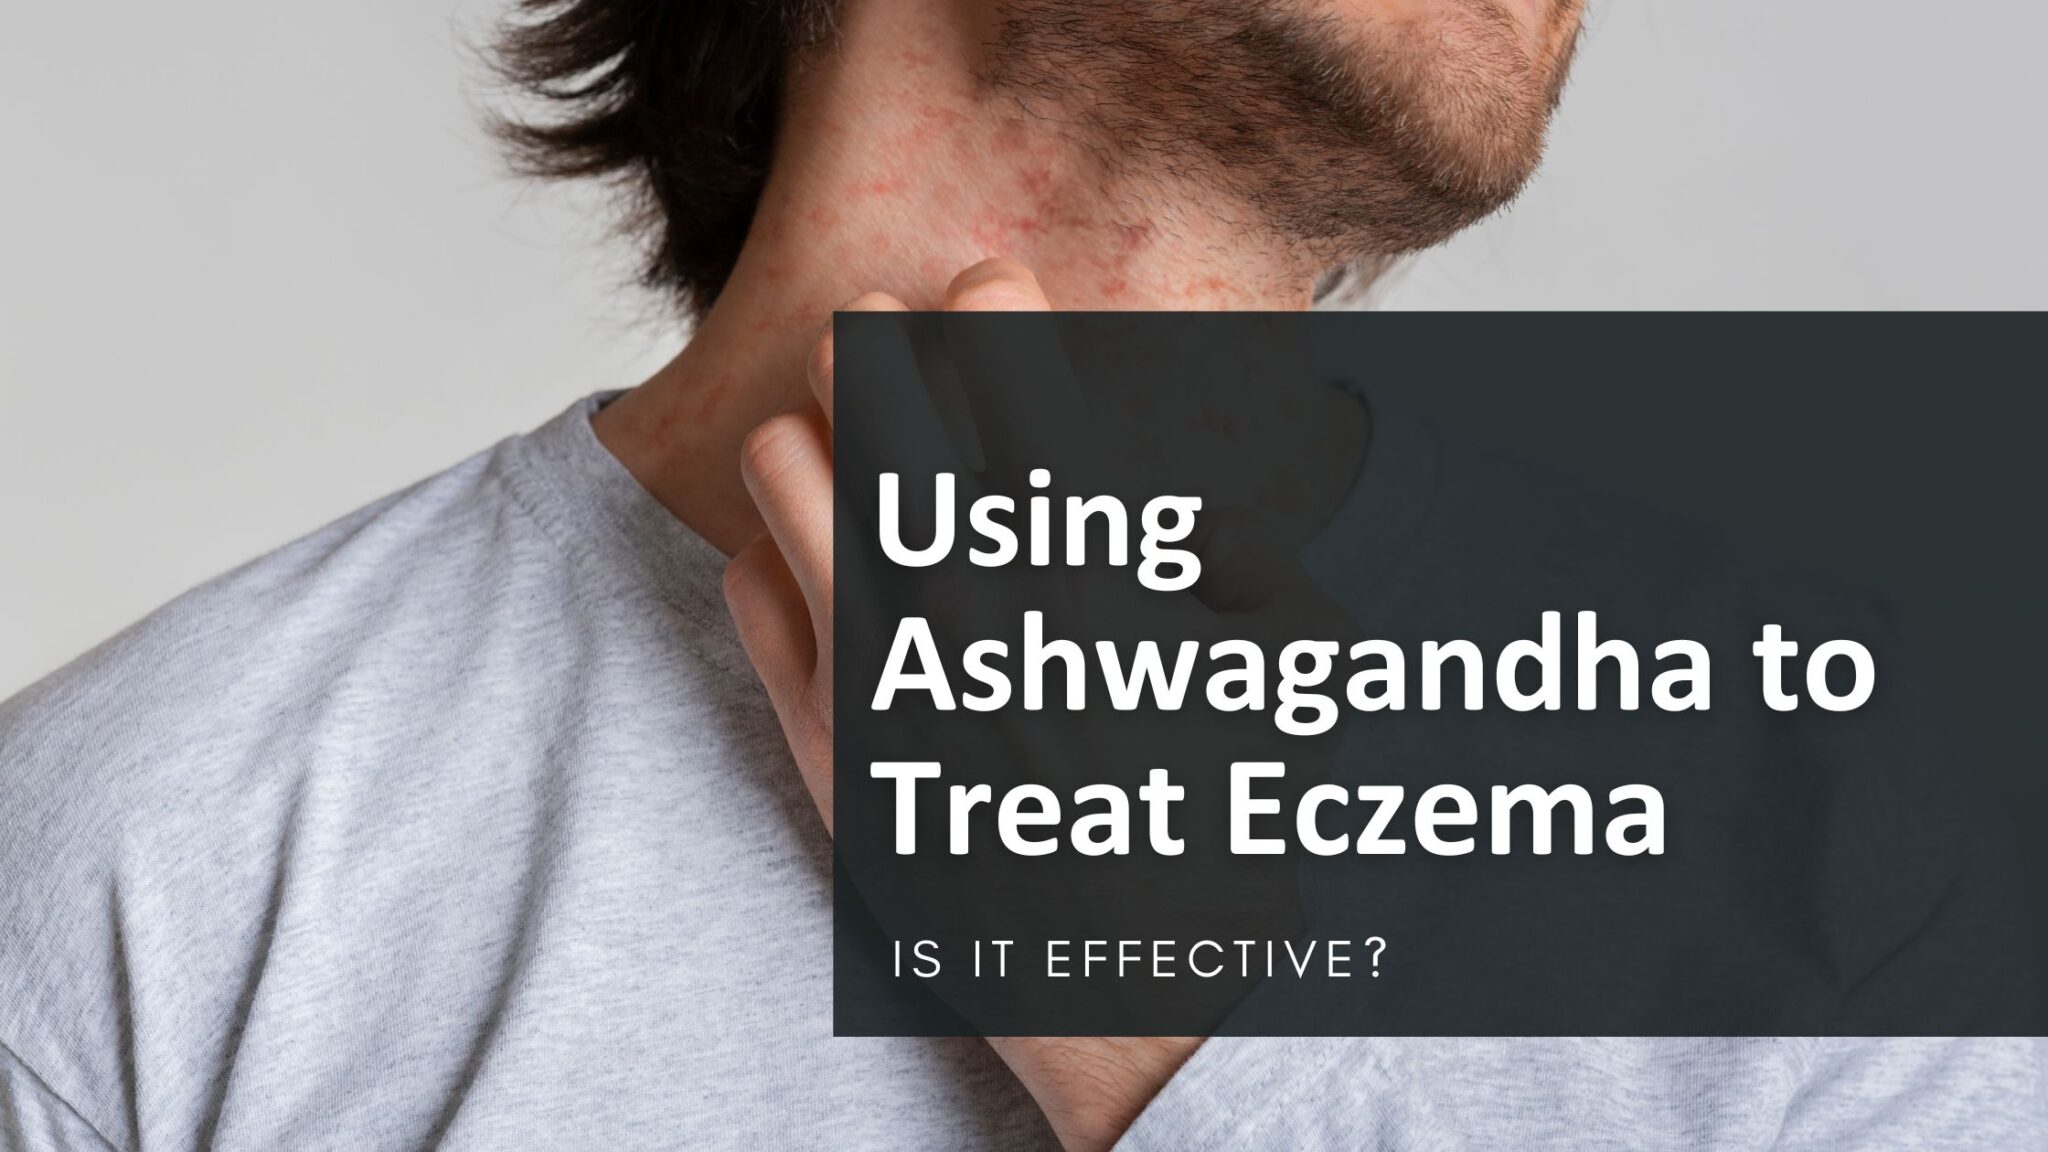 Using Ashwagandha to Treat Eczema: The Benefits and How-To Guide